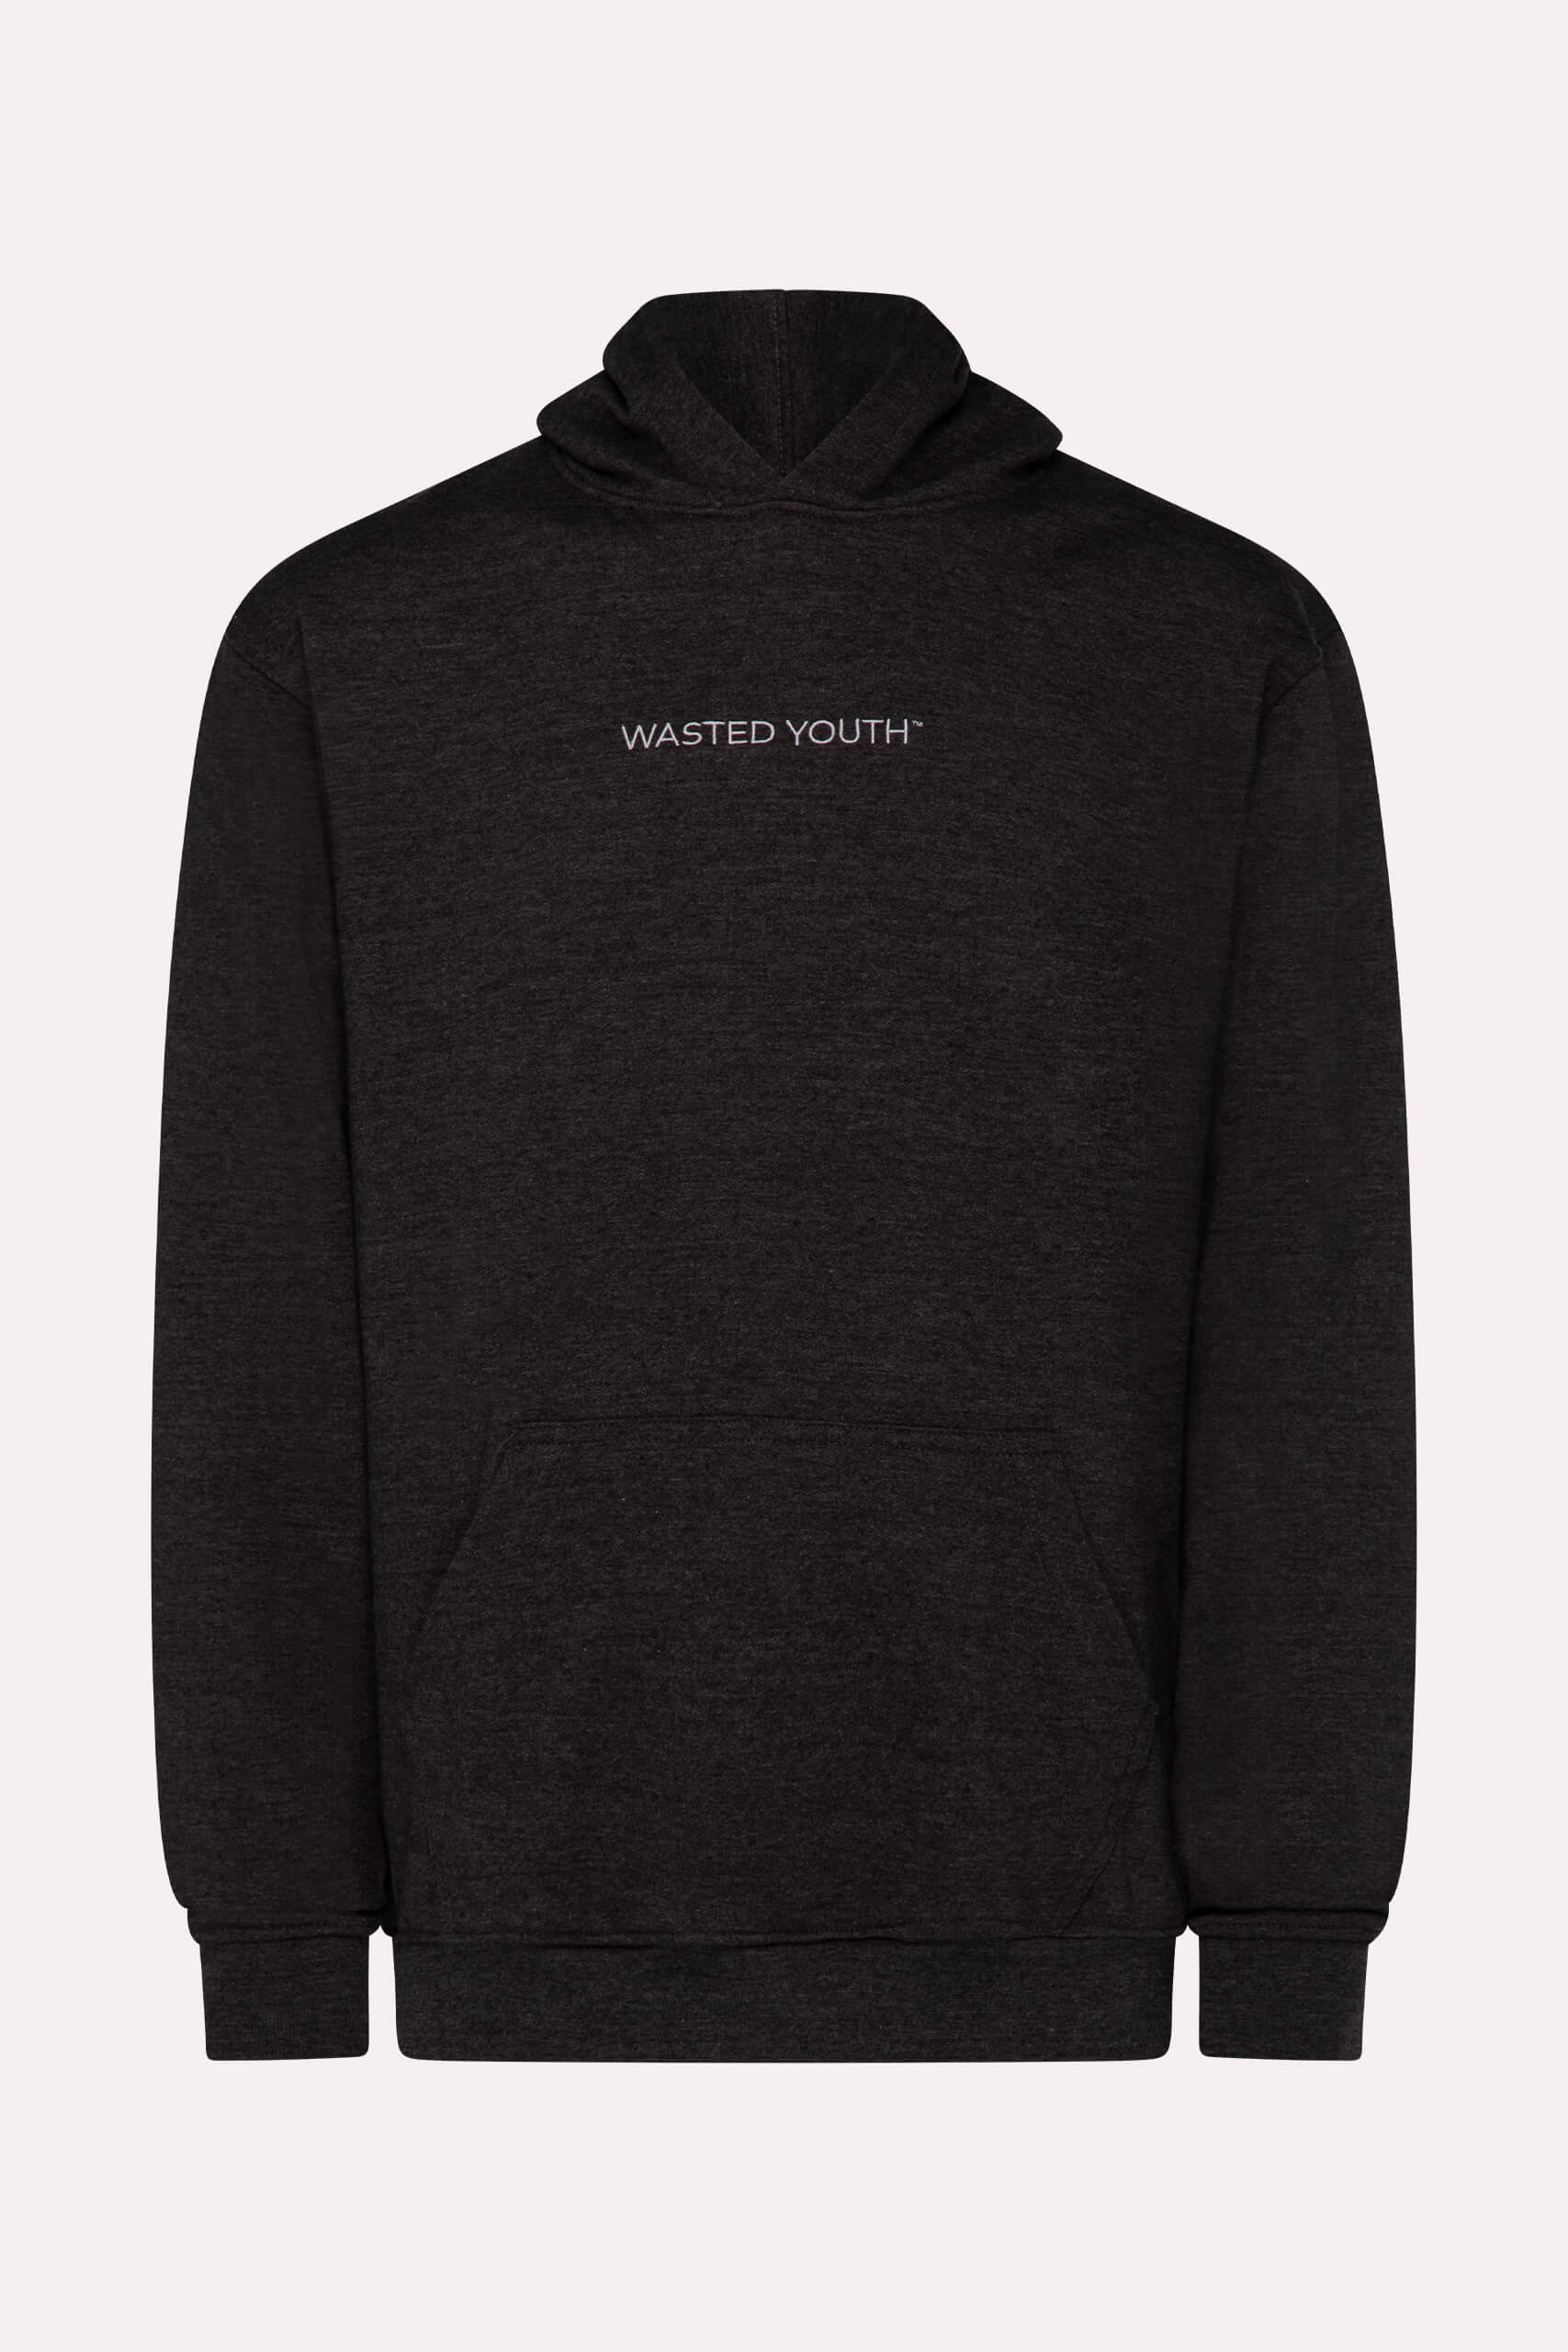 Charcoal Unisex Hoodie - Wasted Youth™